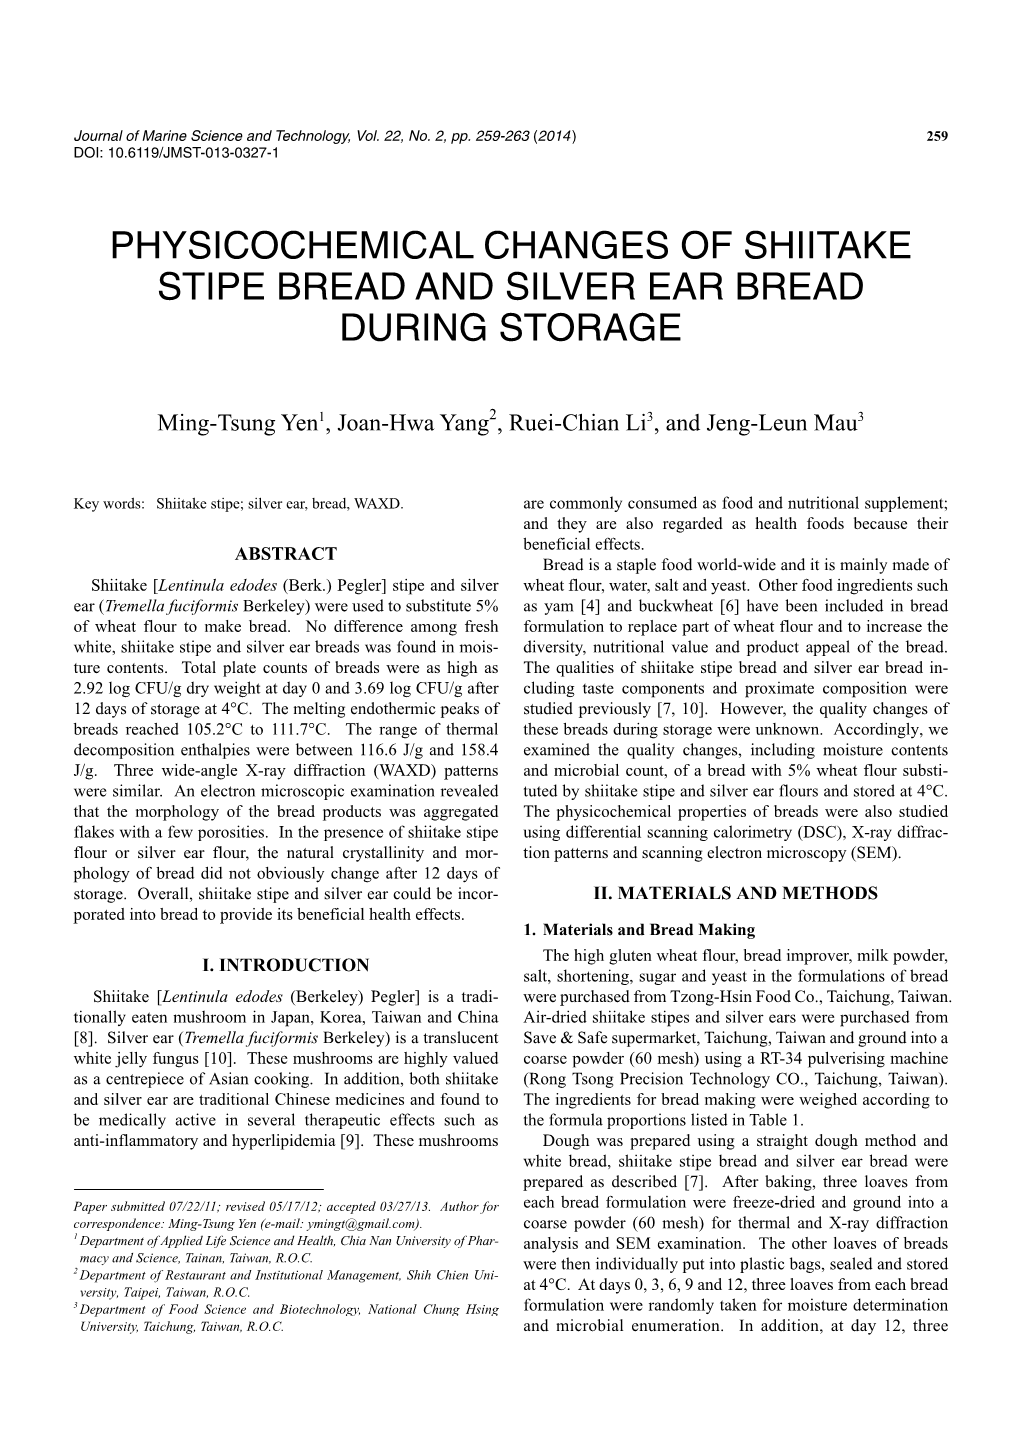 Physicochemical Changes of Shiitake Stipe Bread and Silver Ear Bread During Storage